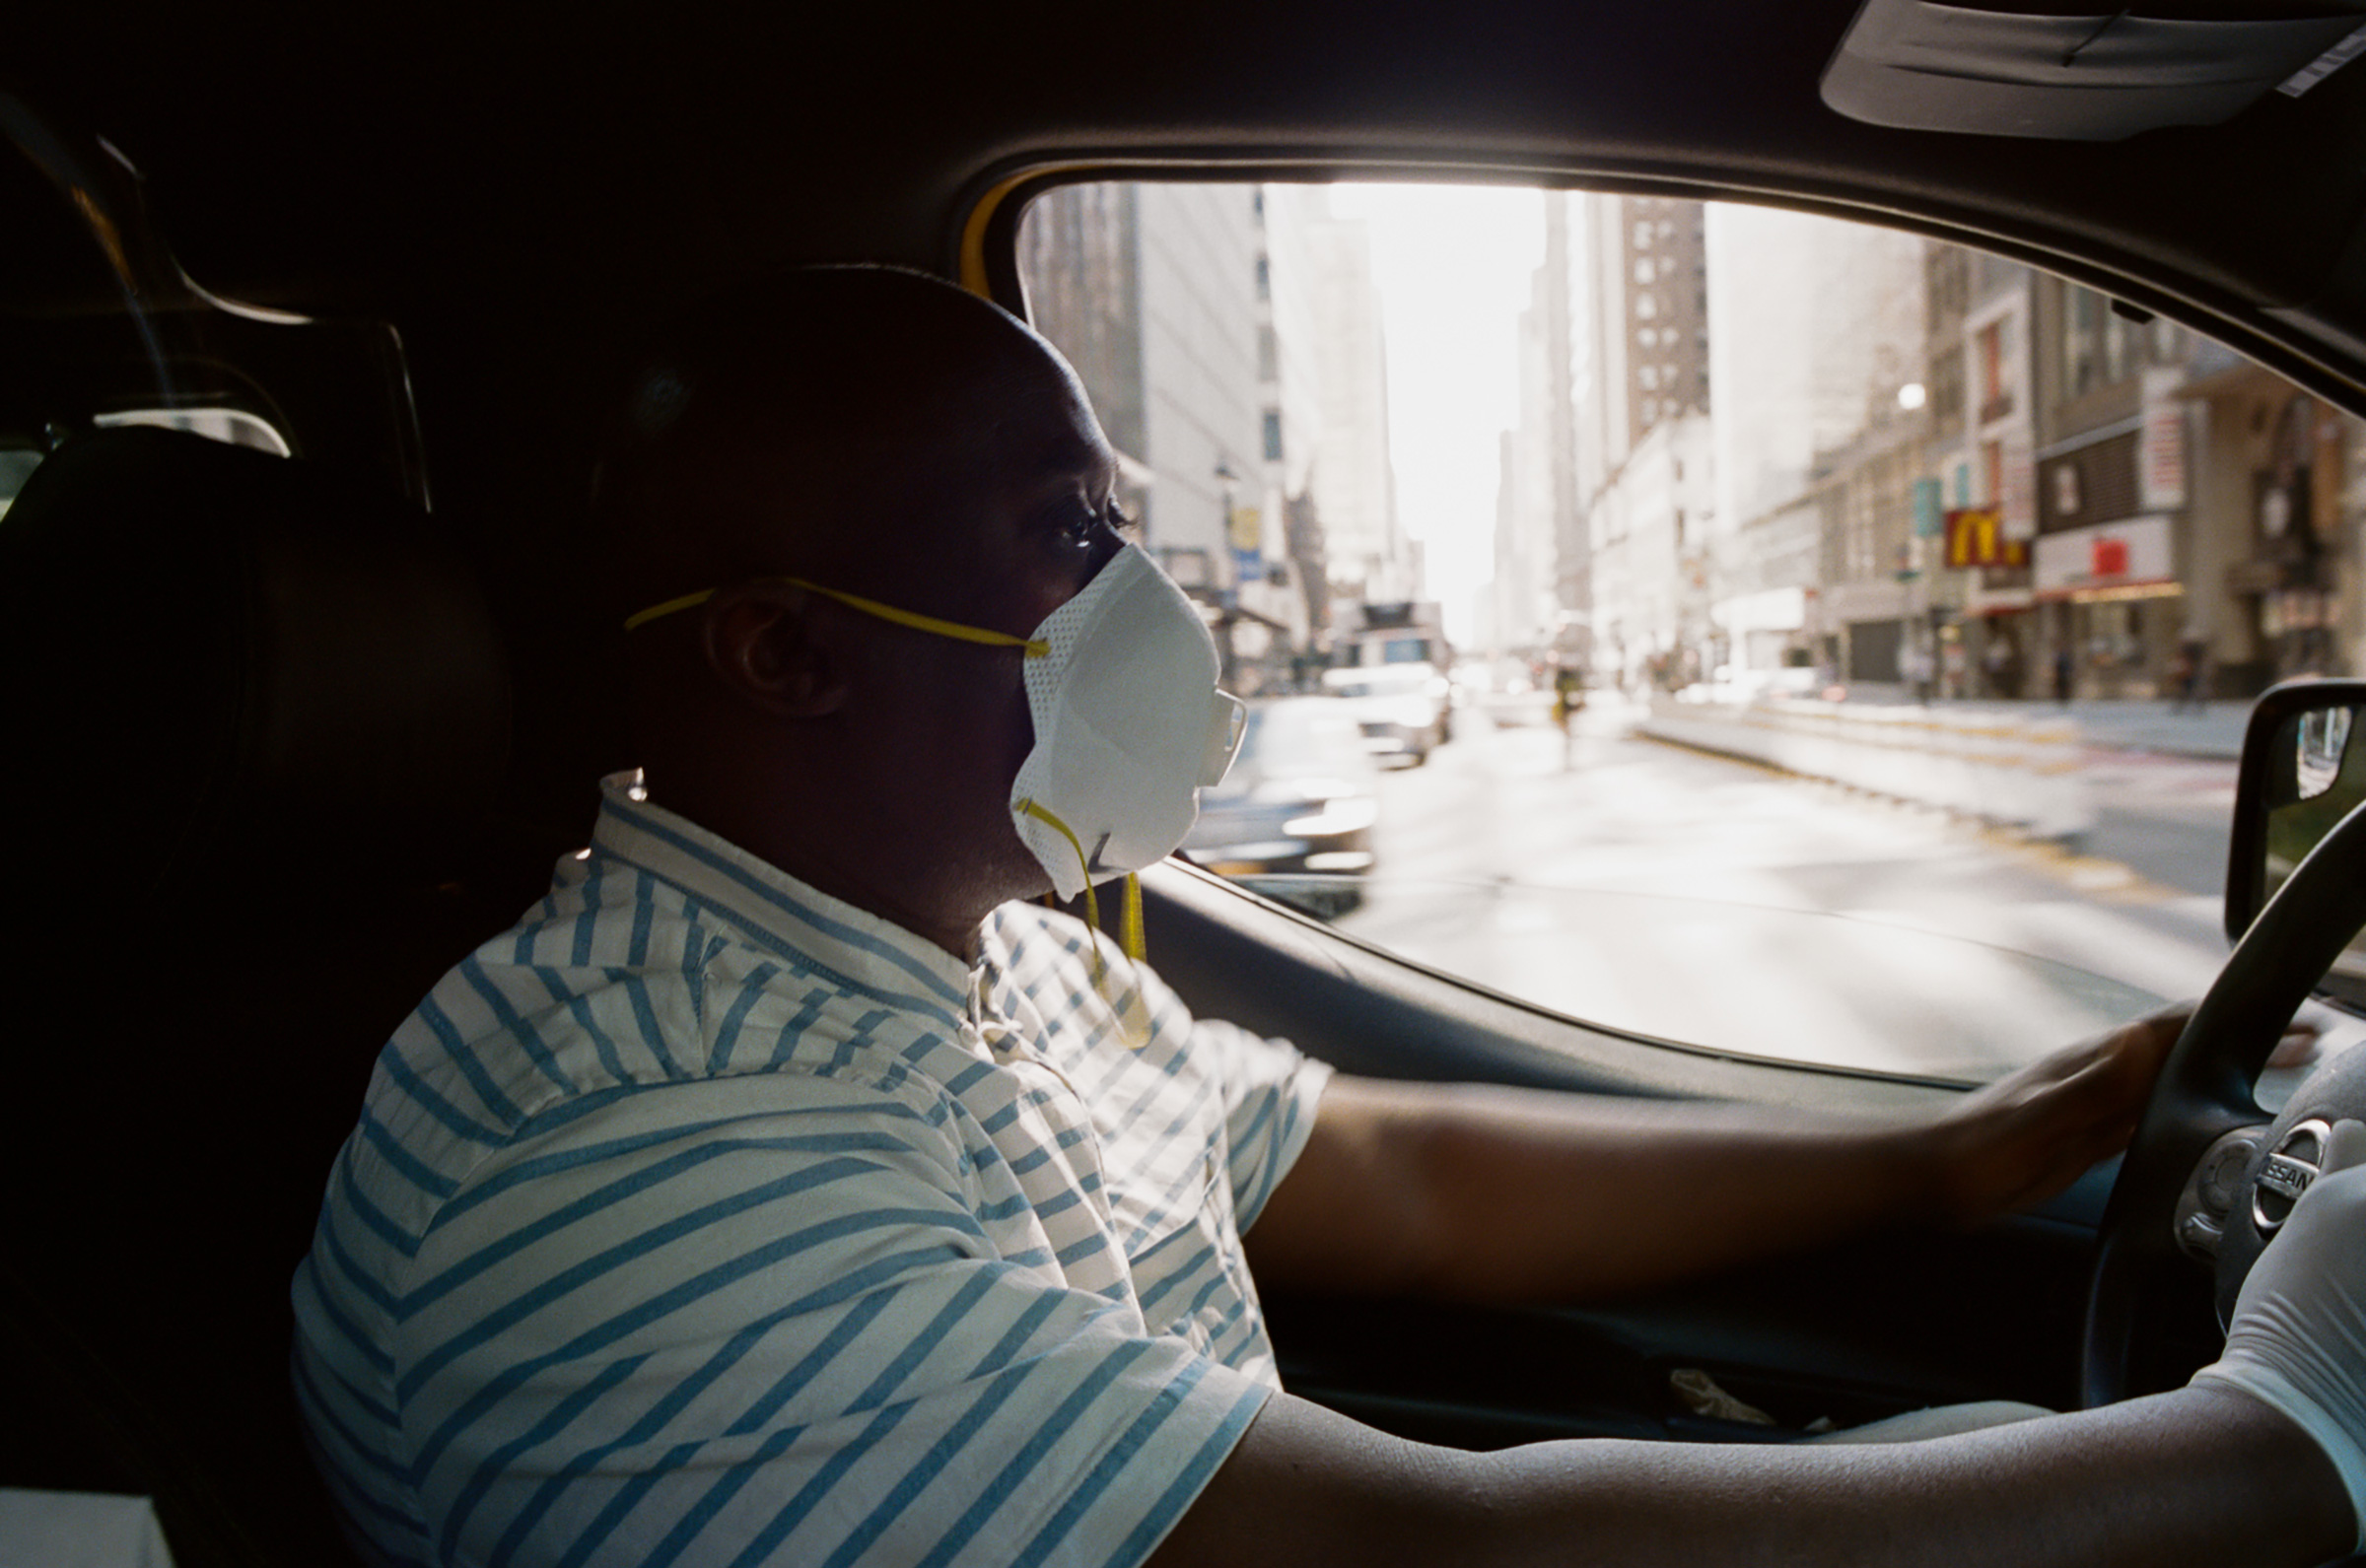 Jacob Smith, 49, has been a taxi driver for almost two years in New York City. "It's dangerous," he says. "My brother is upset that I even go out and try to work. But I’m going, and this is one of the things that’s difficult. You have to make ends meet." (Andre D. Wagner for TIME)